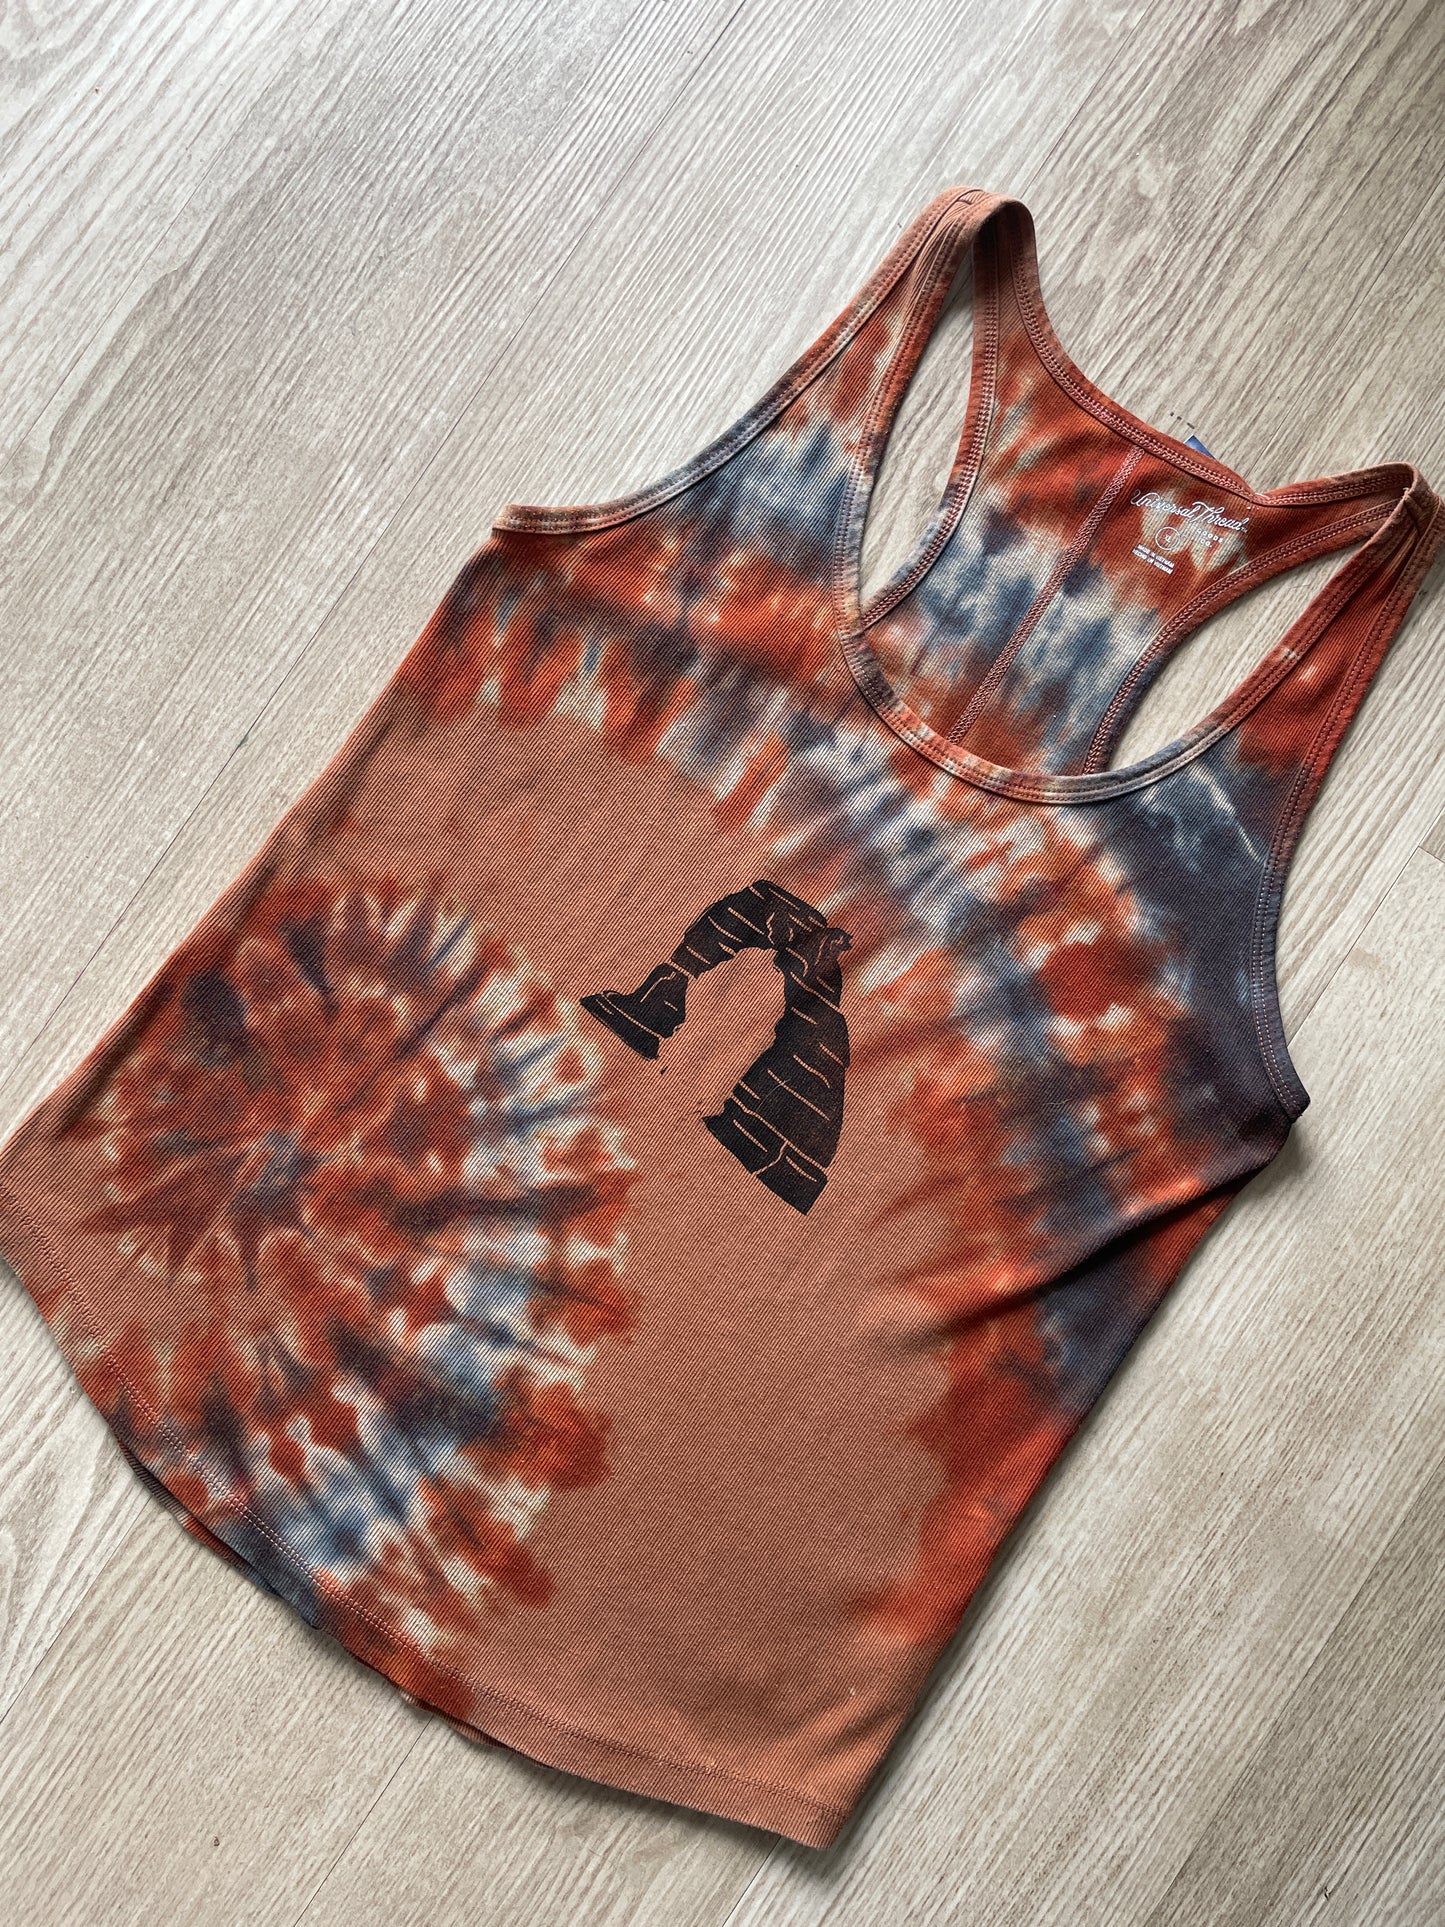 XL Women's Hand-Printed Delicate Arch Reverse Tie Dye Tank Top | Handmade One-Of-a-Kind Upcycled Orange and Black Sleeveless Top